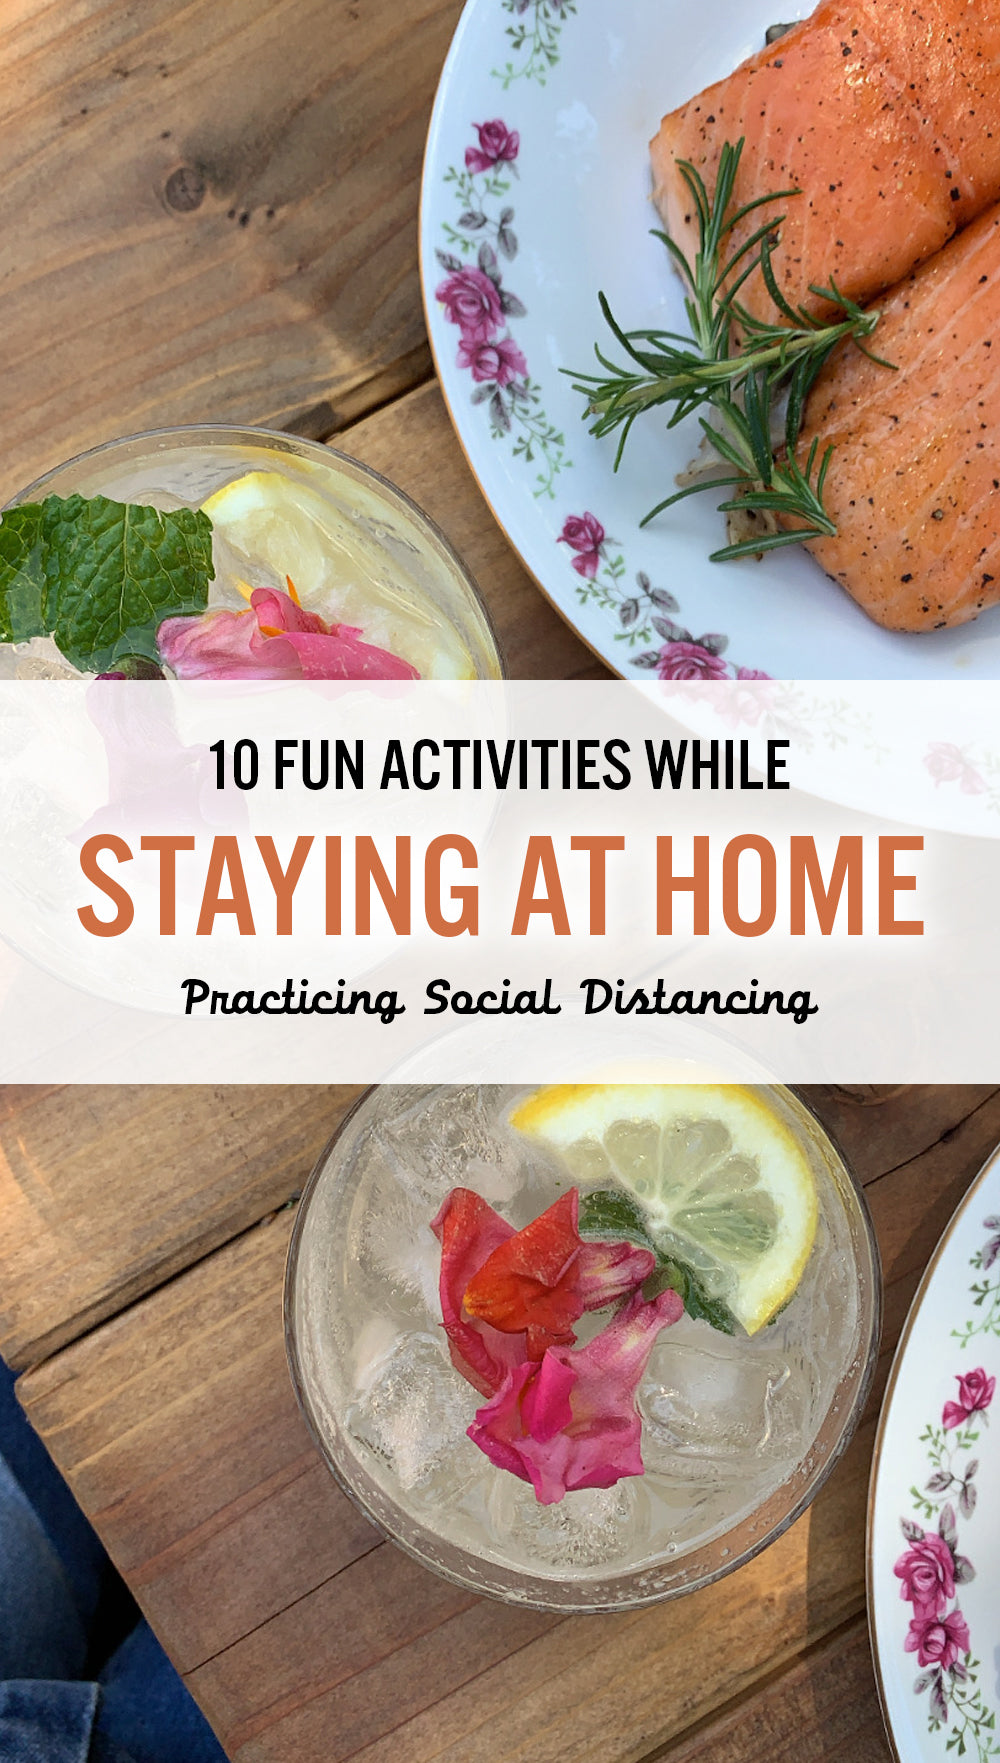 10 Fun Activities While Staying At Home (Practicing Social Distancing)